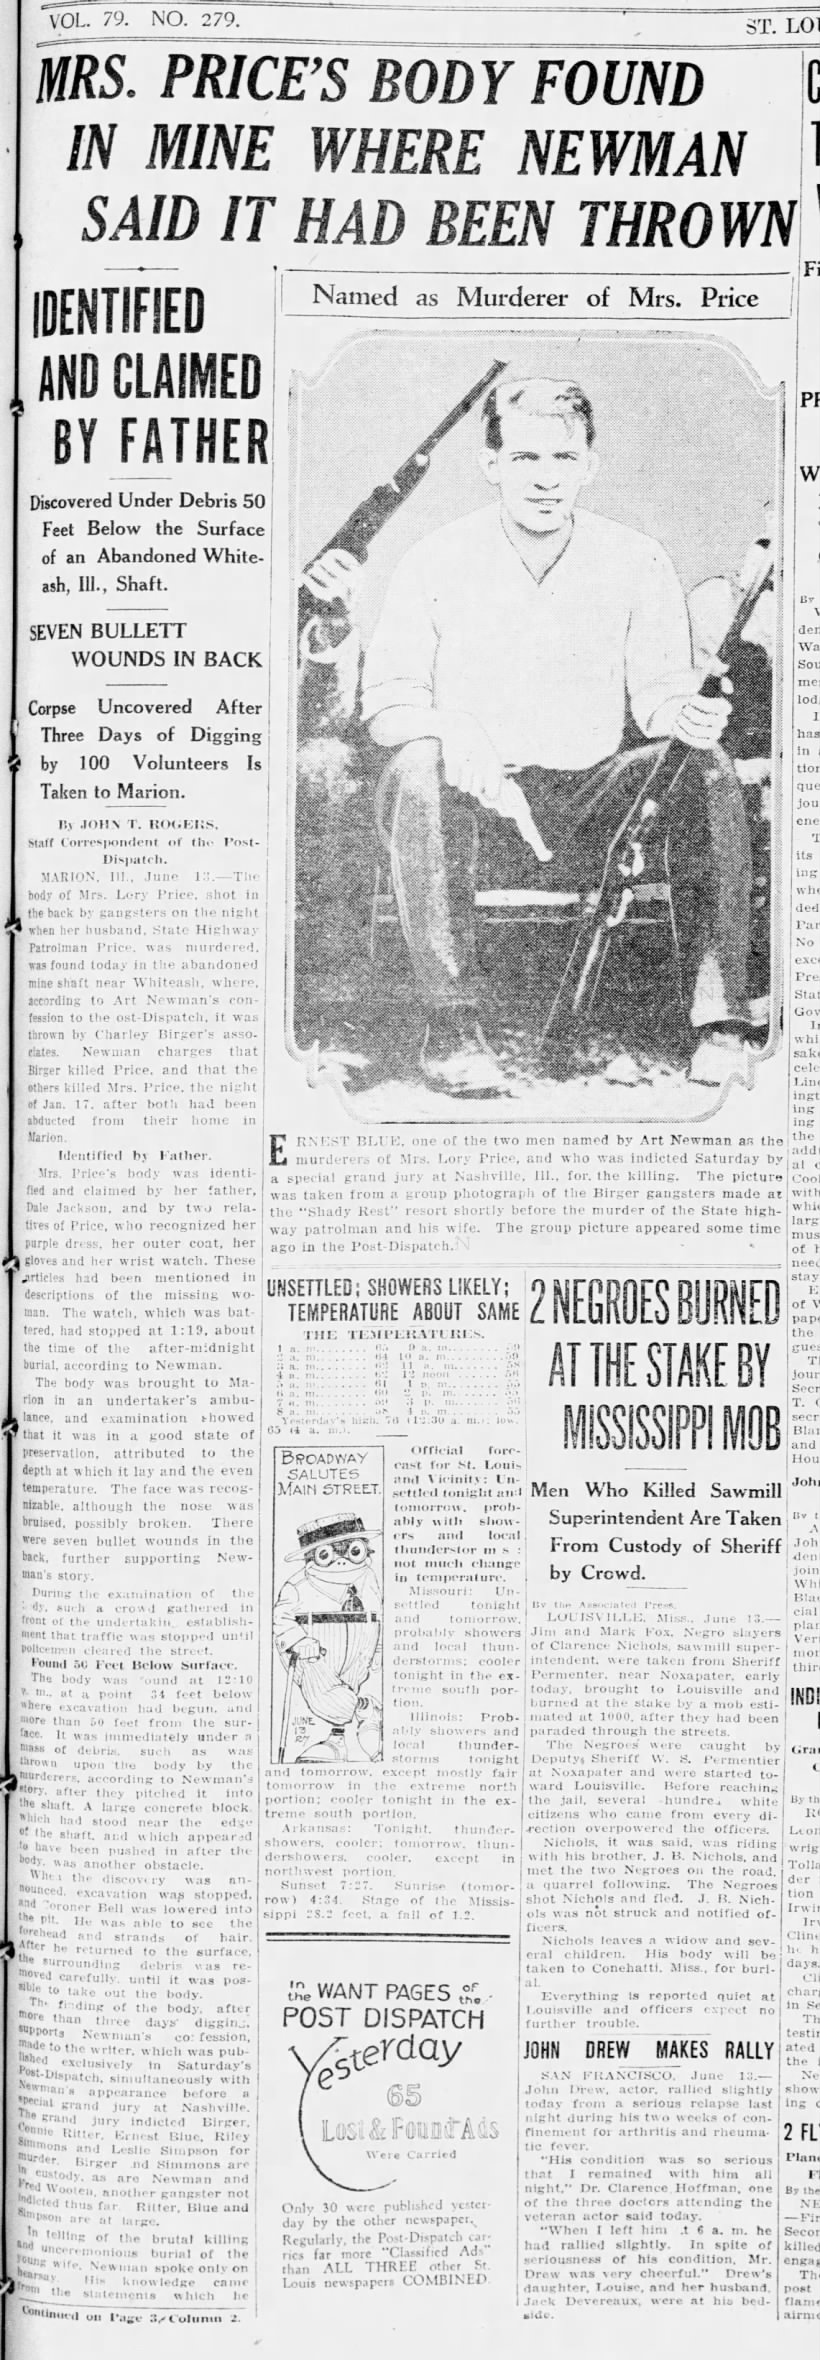 1927: Testimony by member of Birger gang leads to the body of policeman's slain wife.